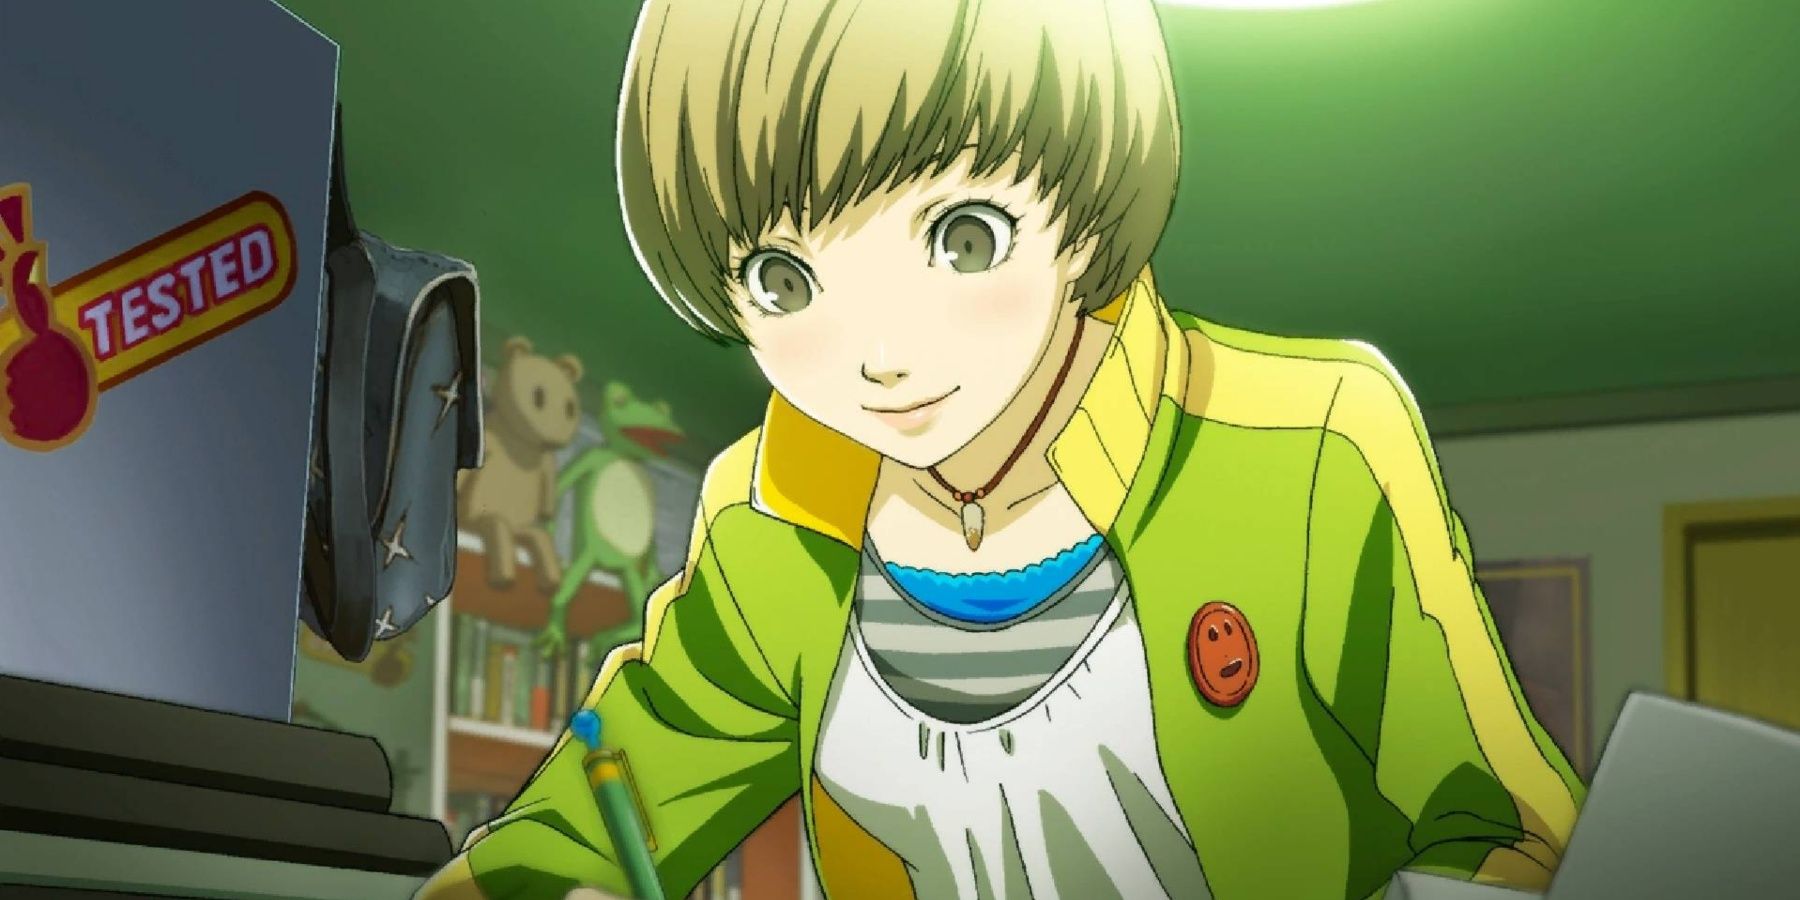 Chie from Persona 4 sitting at a desk